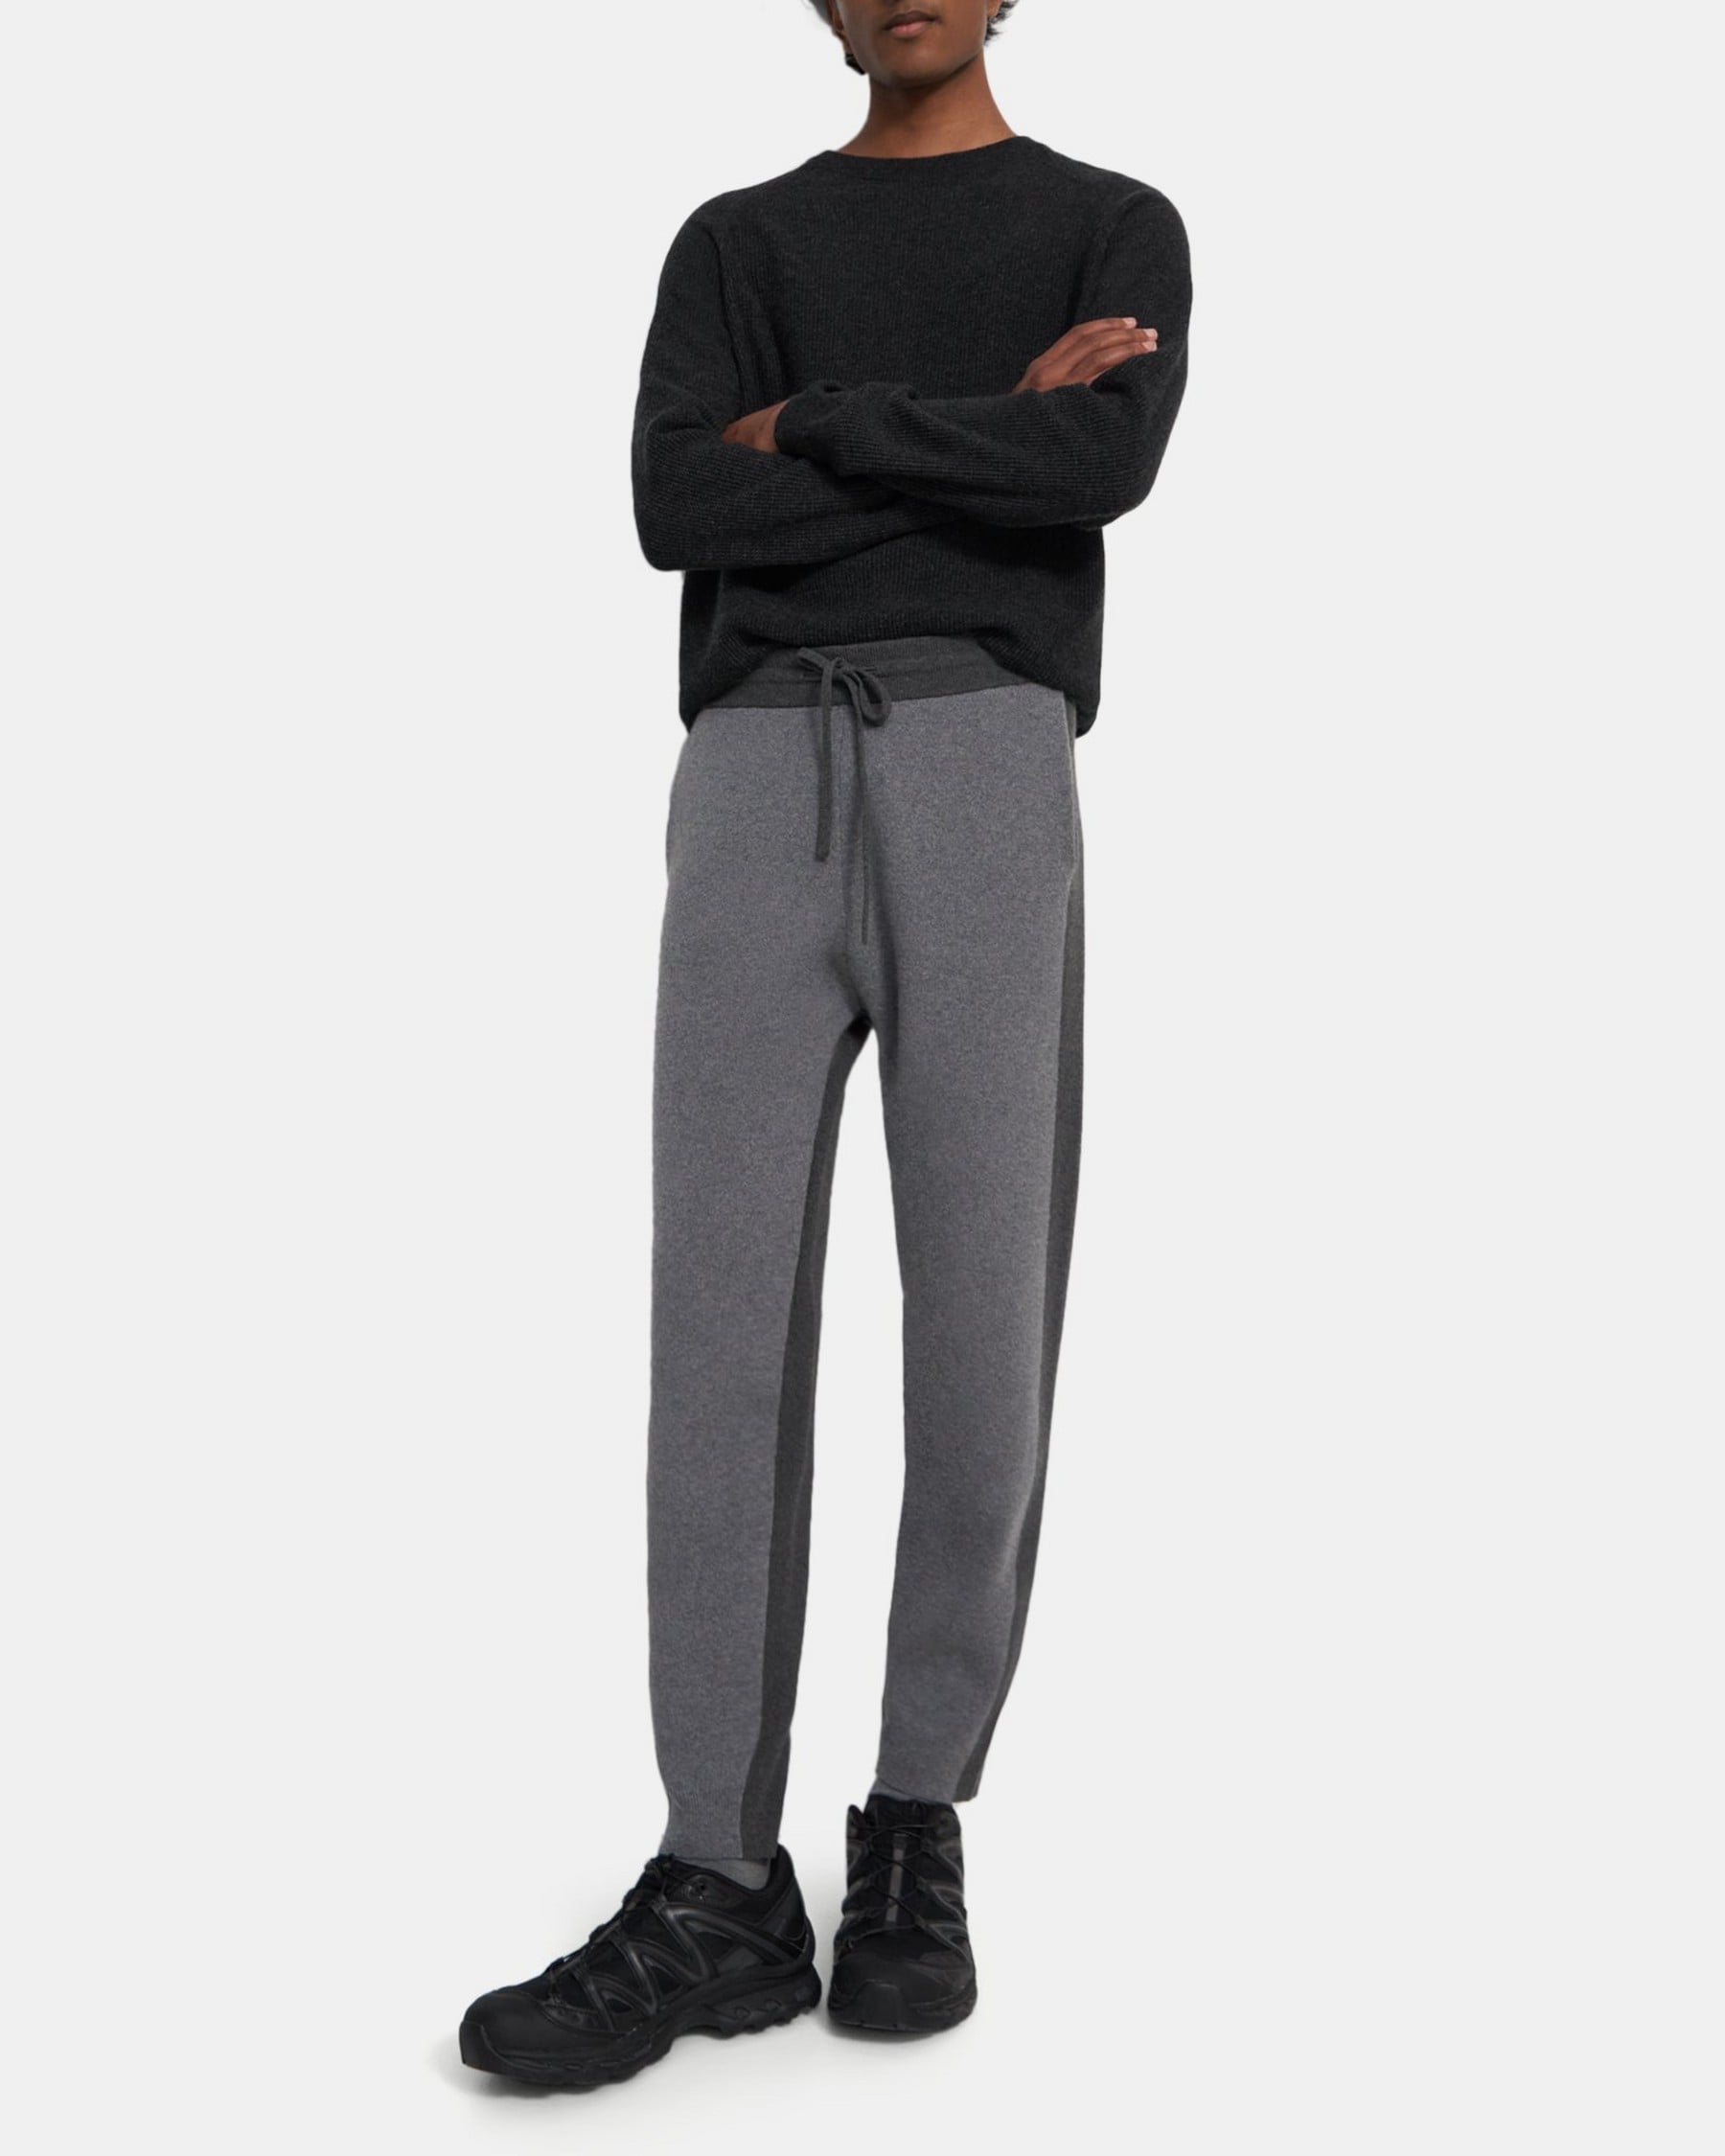 Alcos Jogger in Wool-Cashmere